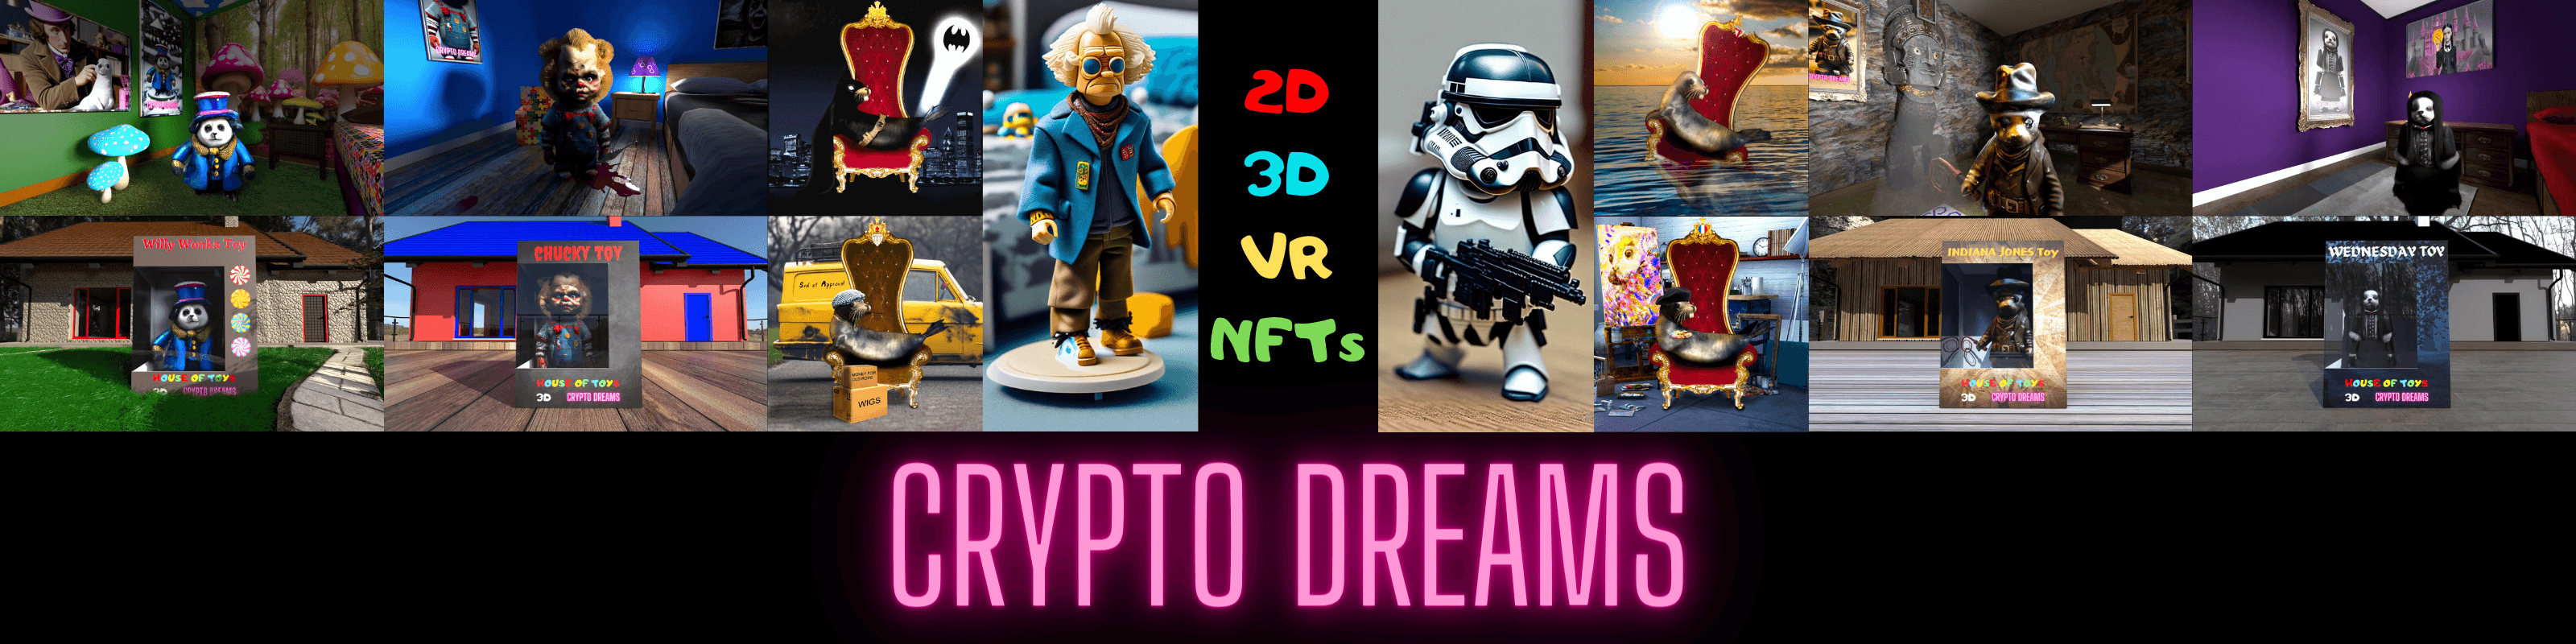 cryptodreams_co_uk banner